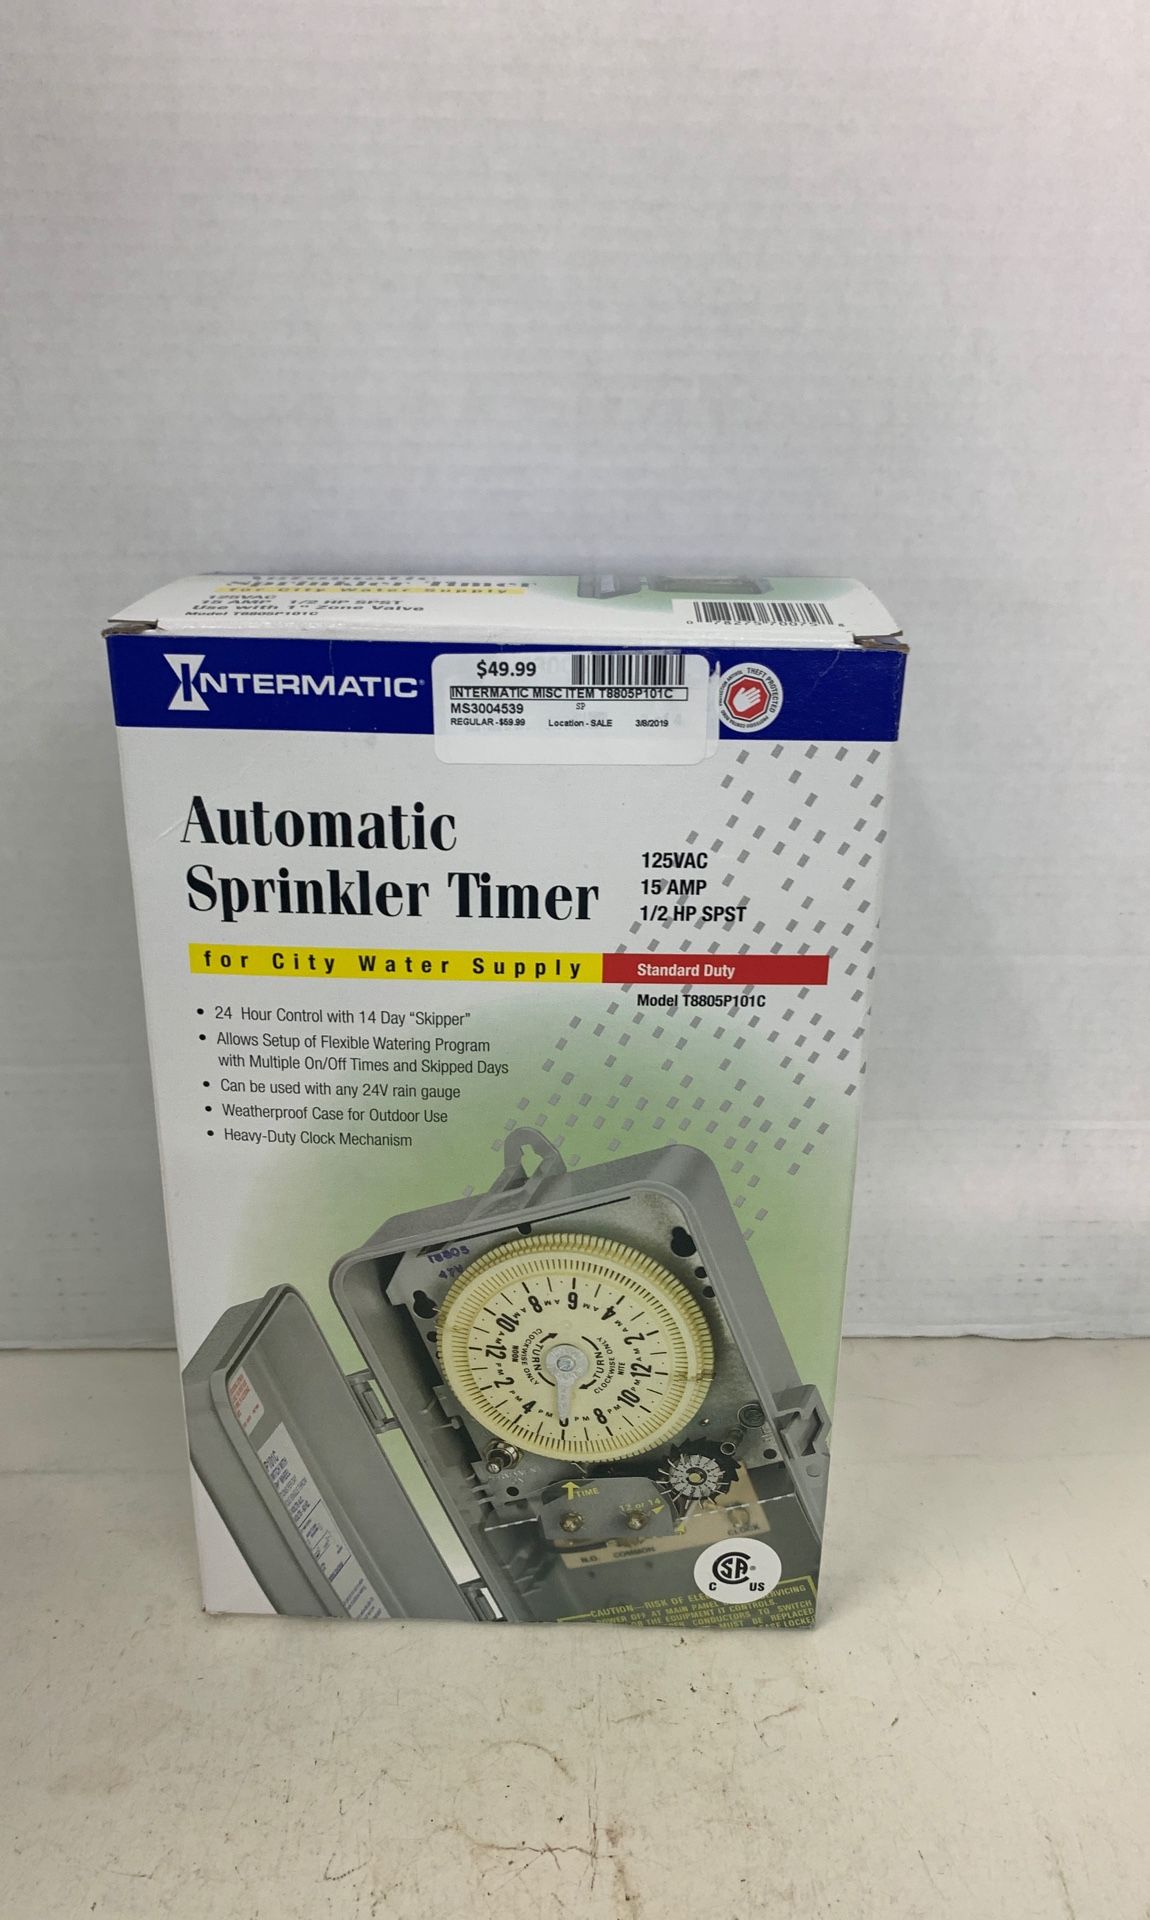 Intermatic automatic sprinkler timer